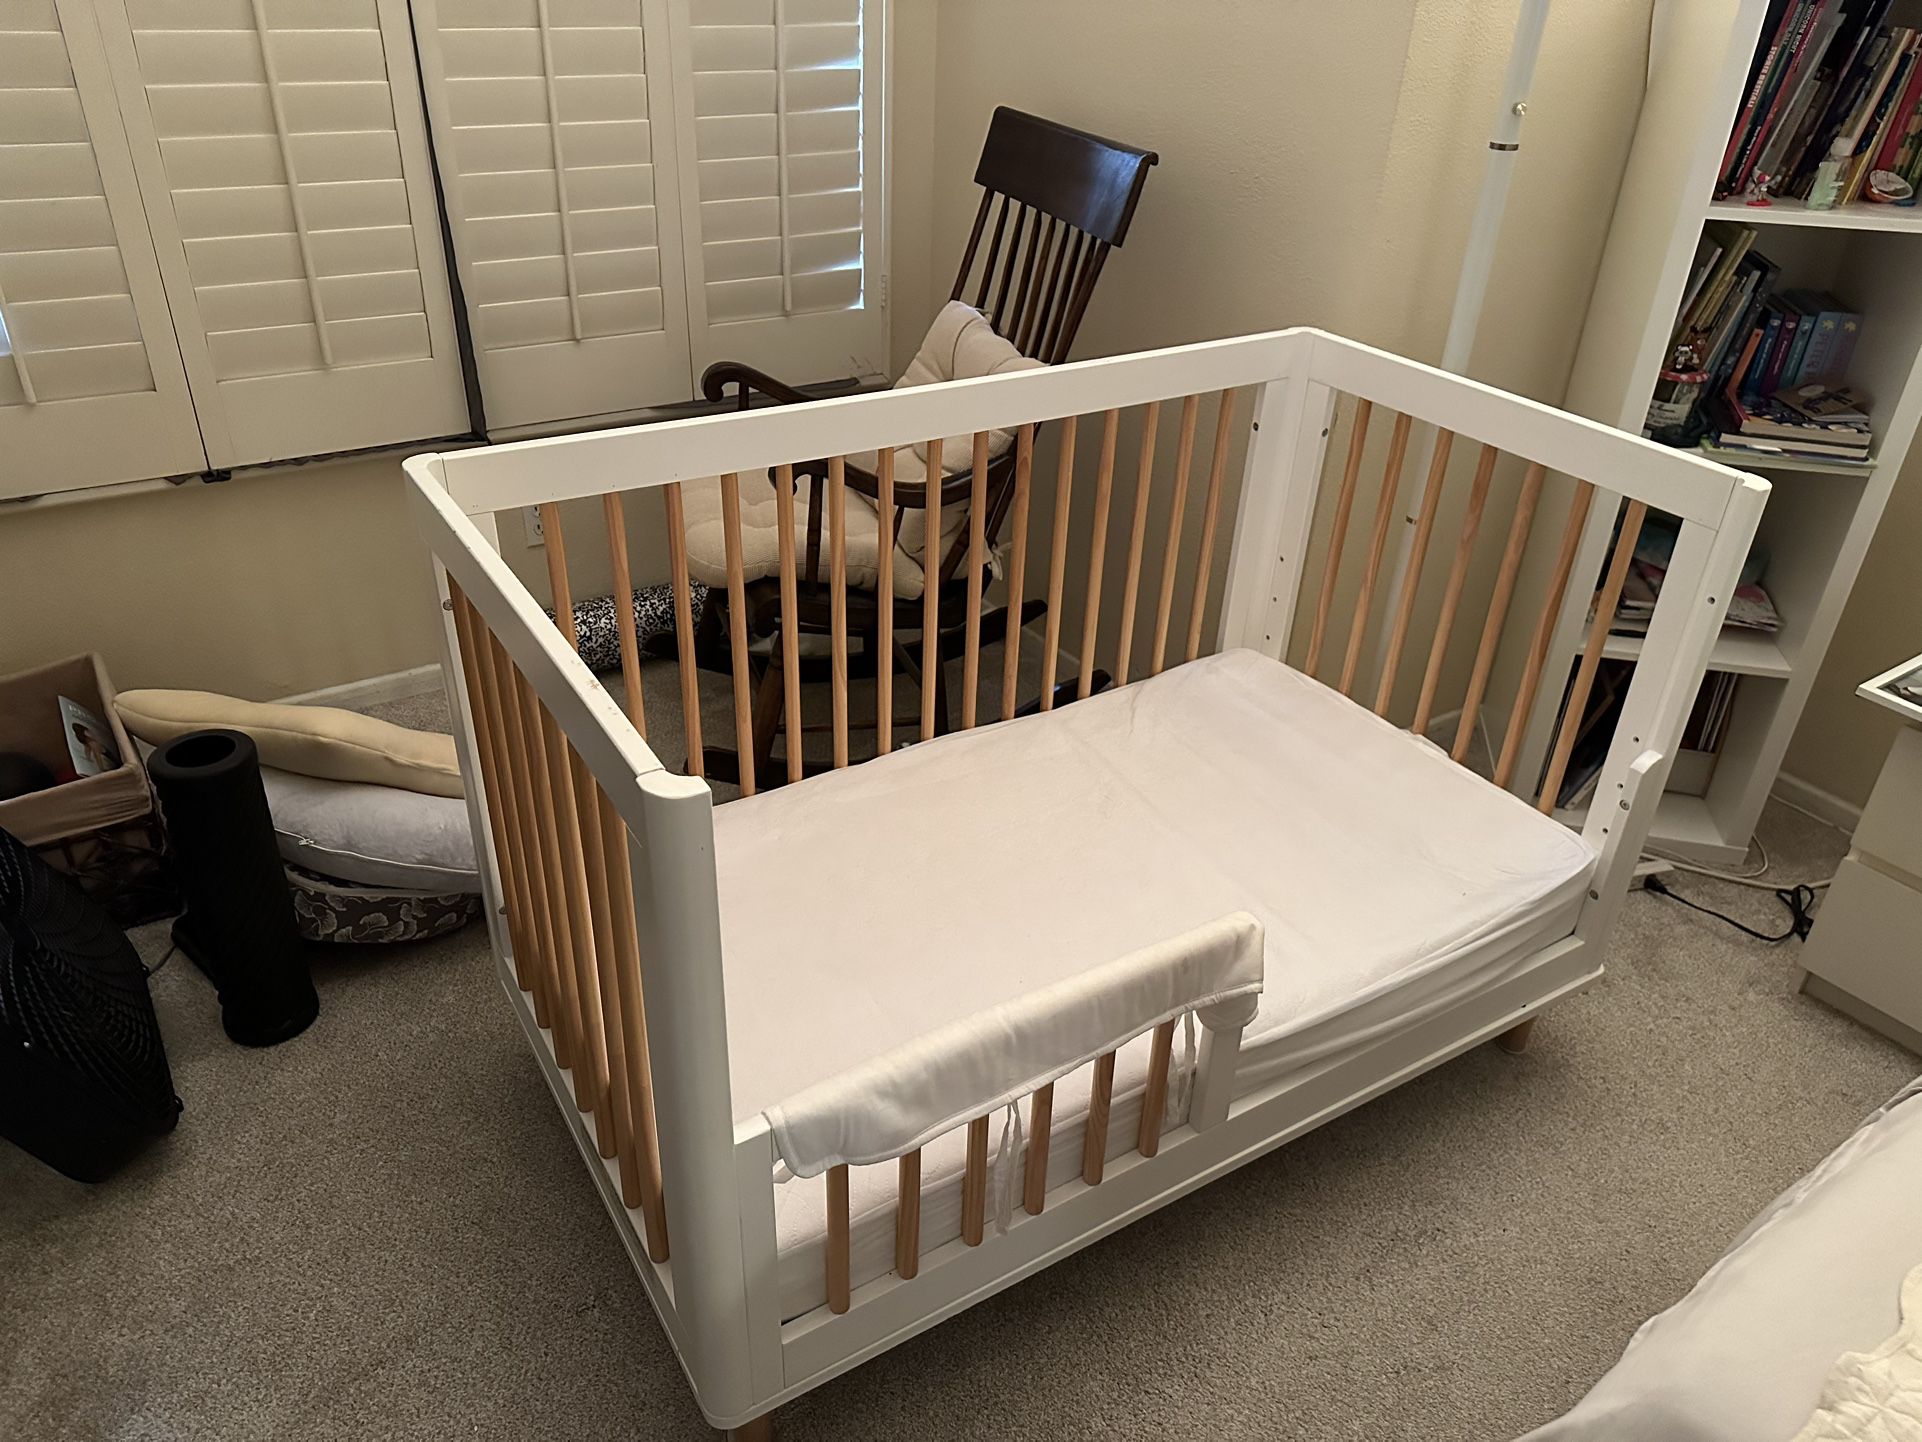 3:1 Babyletto Convertible Crib and Mattress- Excellent Condition limited Use